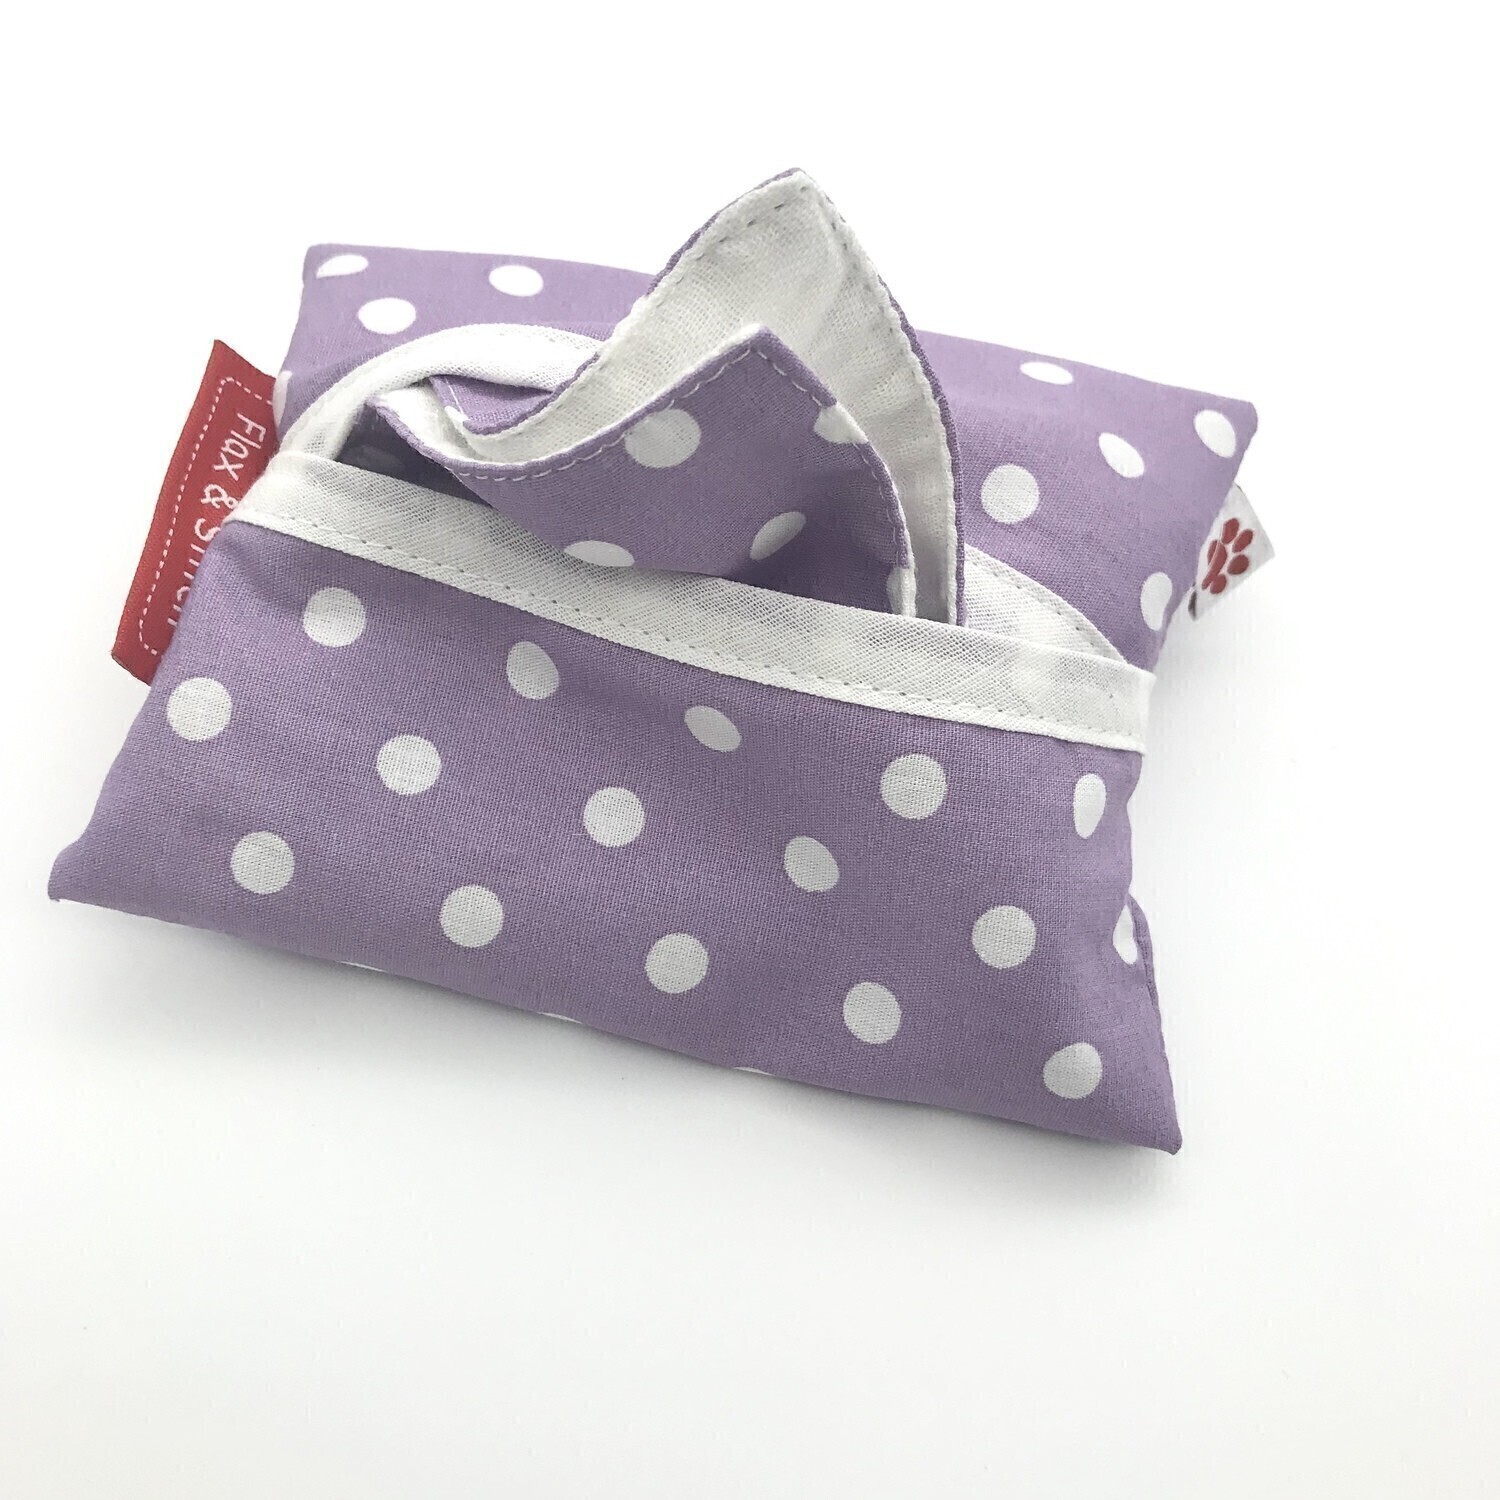 Winter Hankies - Pack of 3 - Dots Lilac